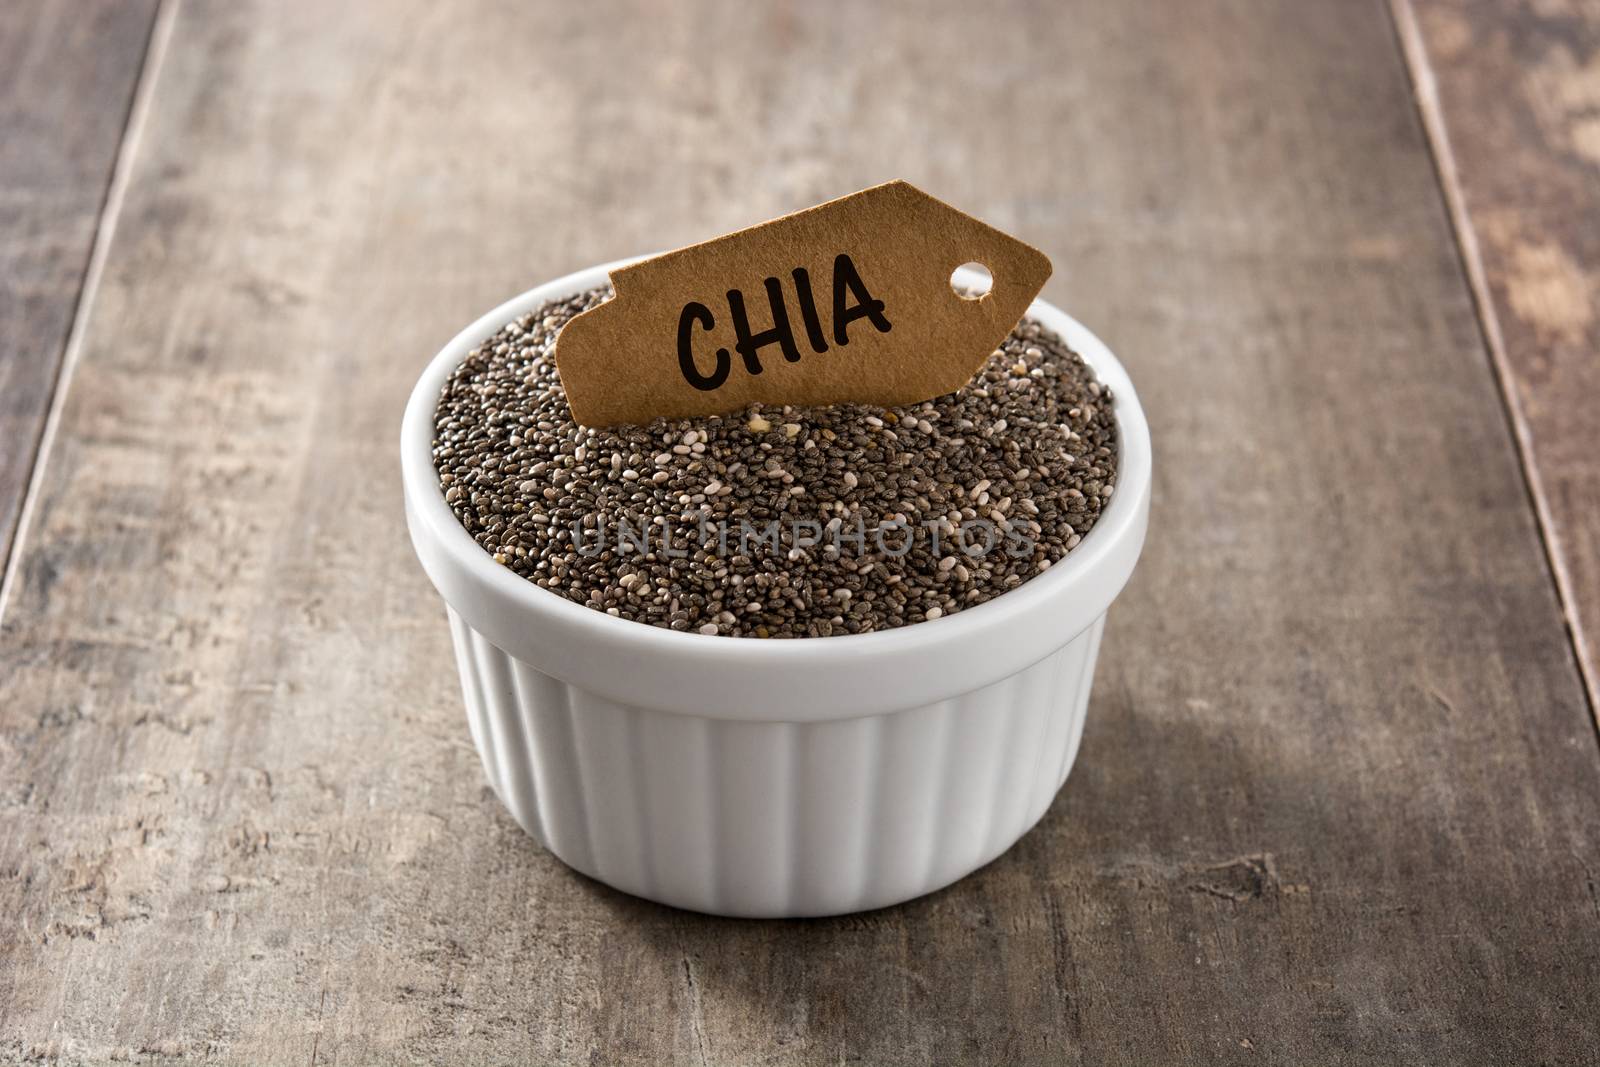 Chia seeds in bowl by chandlervid85